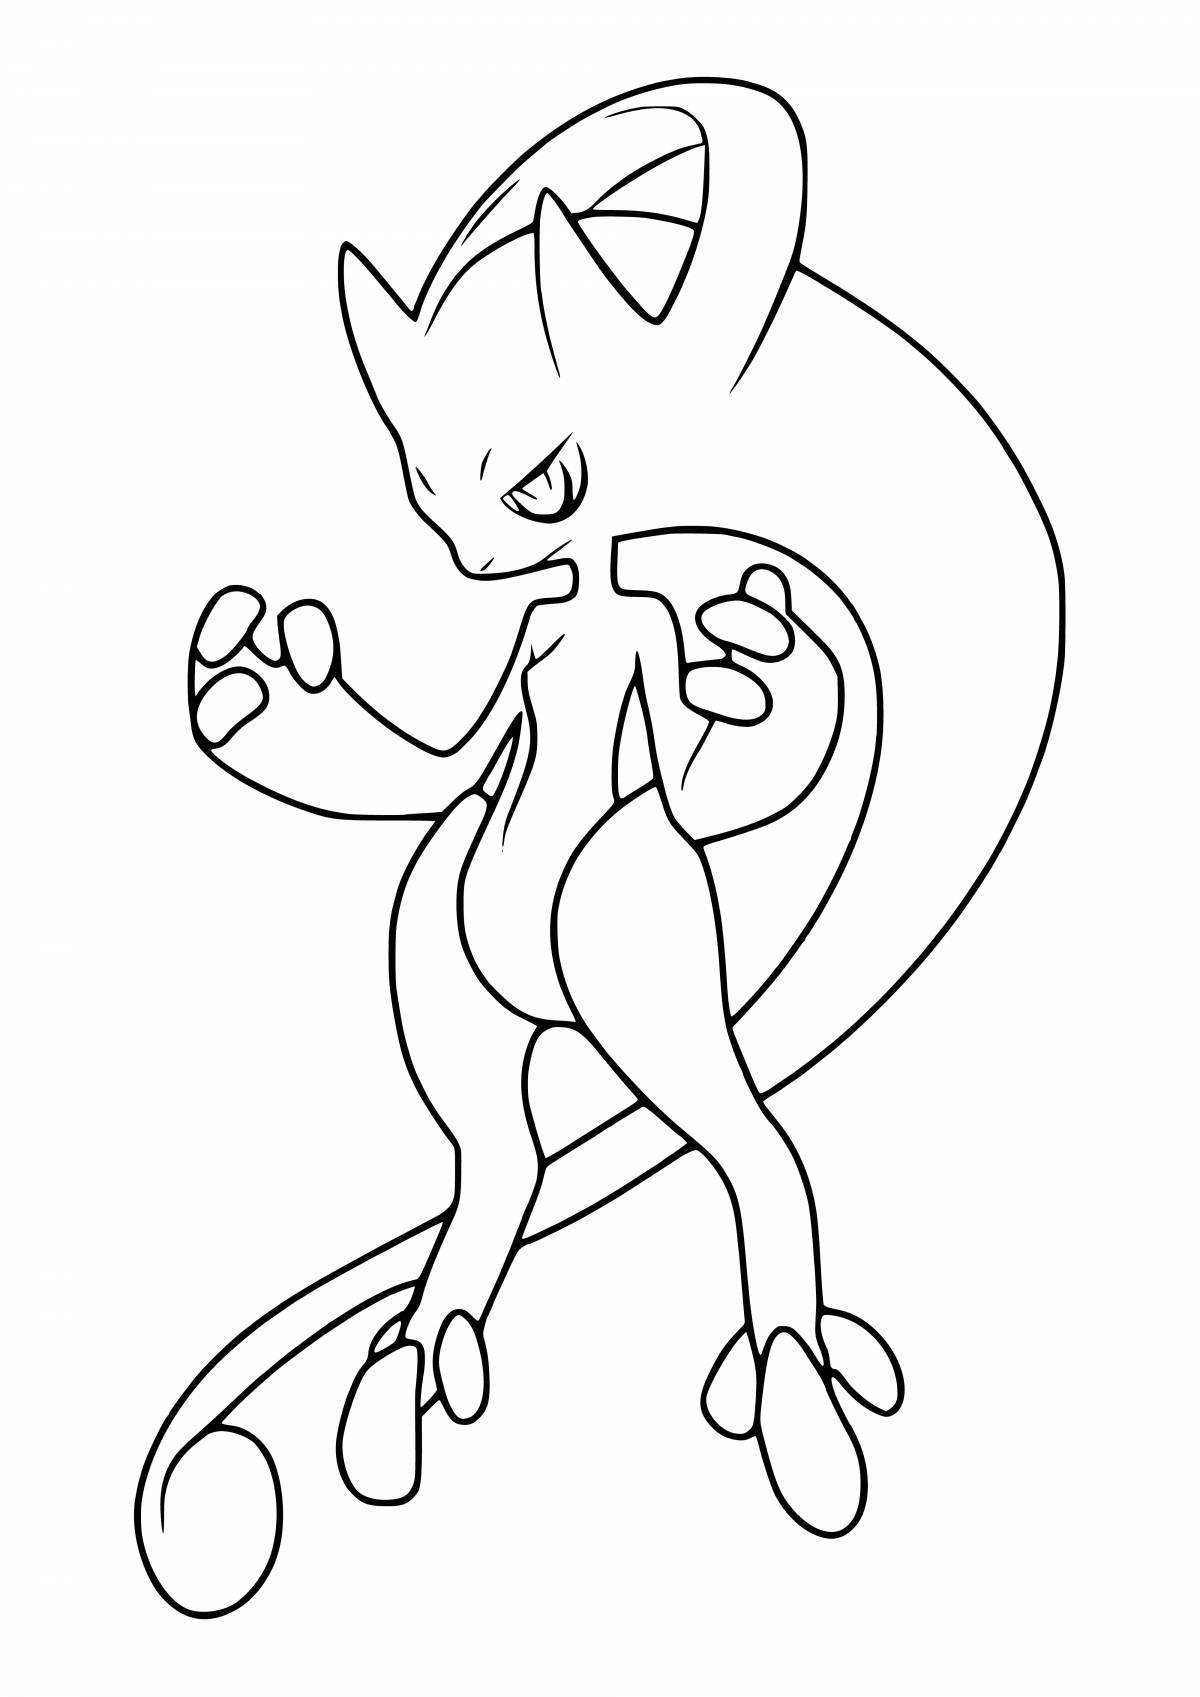 Dramatic silent pokemon coloring page